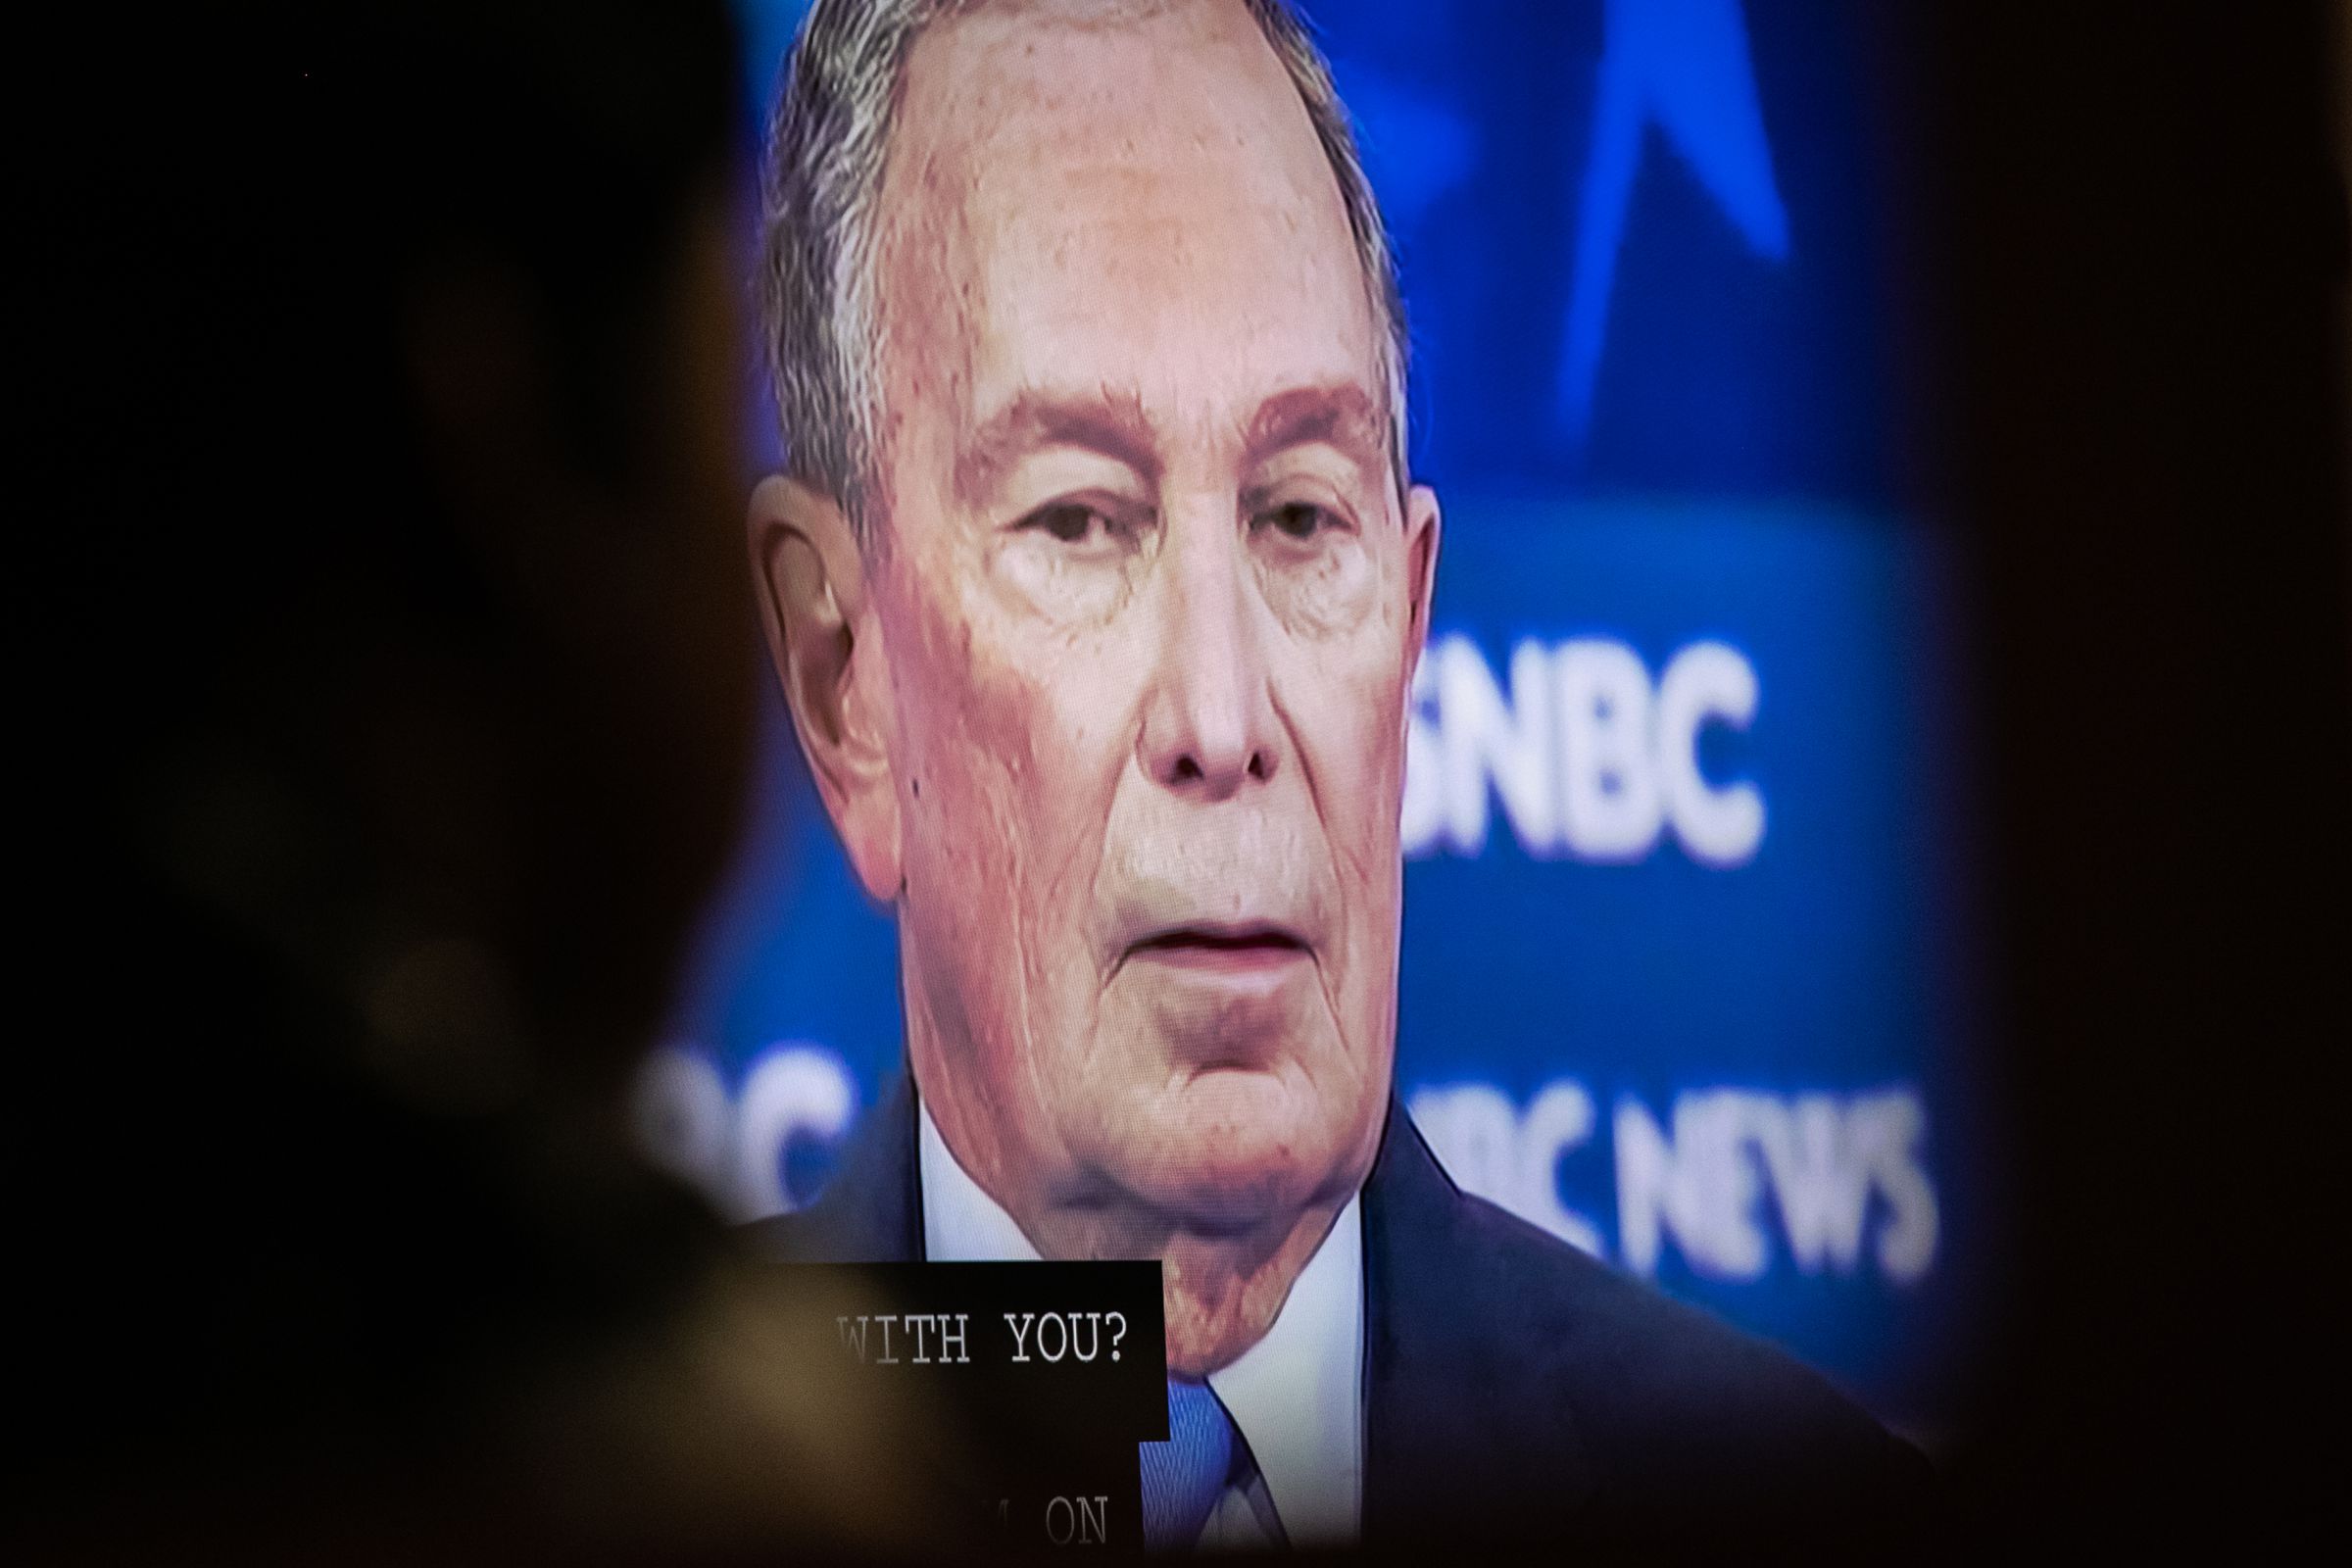 Democratic presidential candidate former New York City Mayor Mike Bloomberg is shown on a screen during a debate watch party at the candidate’s field office on Wednesday in the Brooklyn borough of New York City